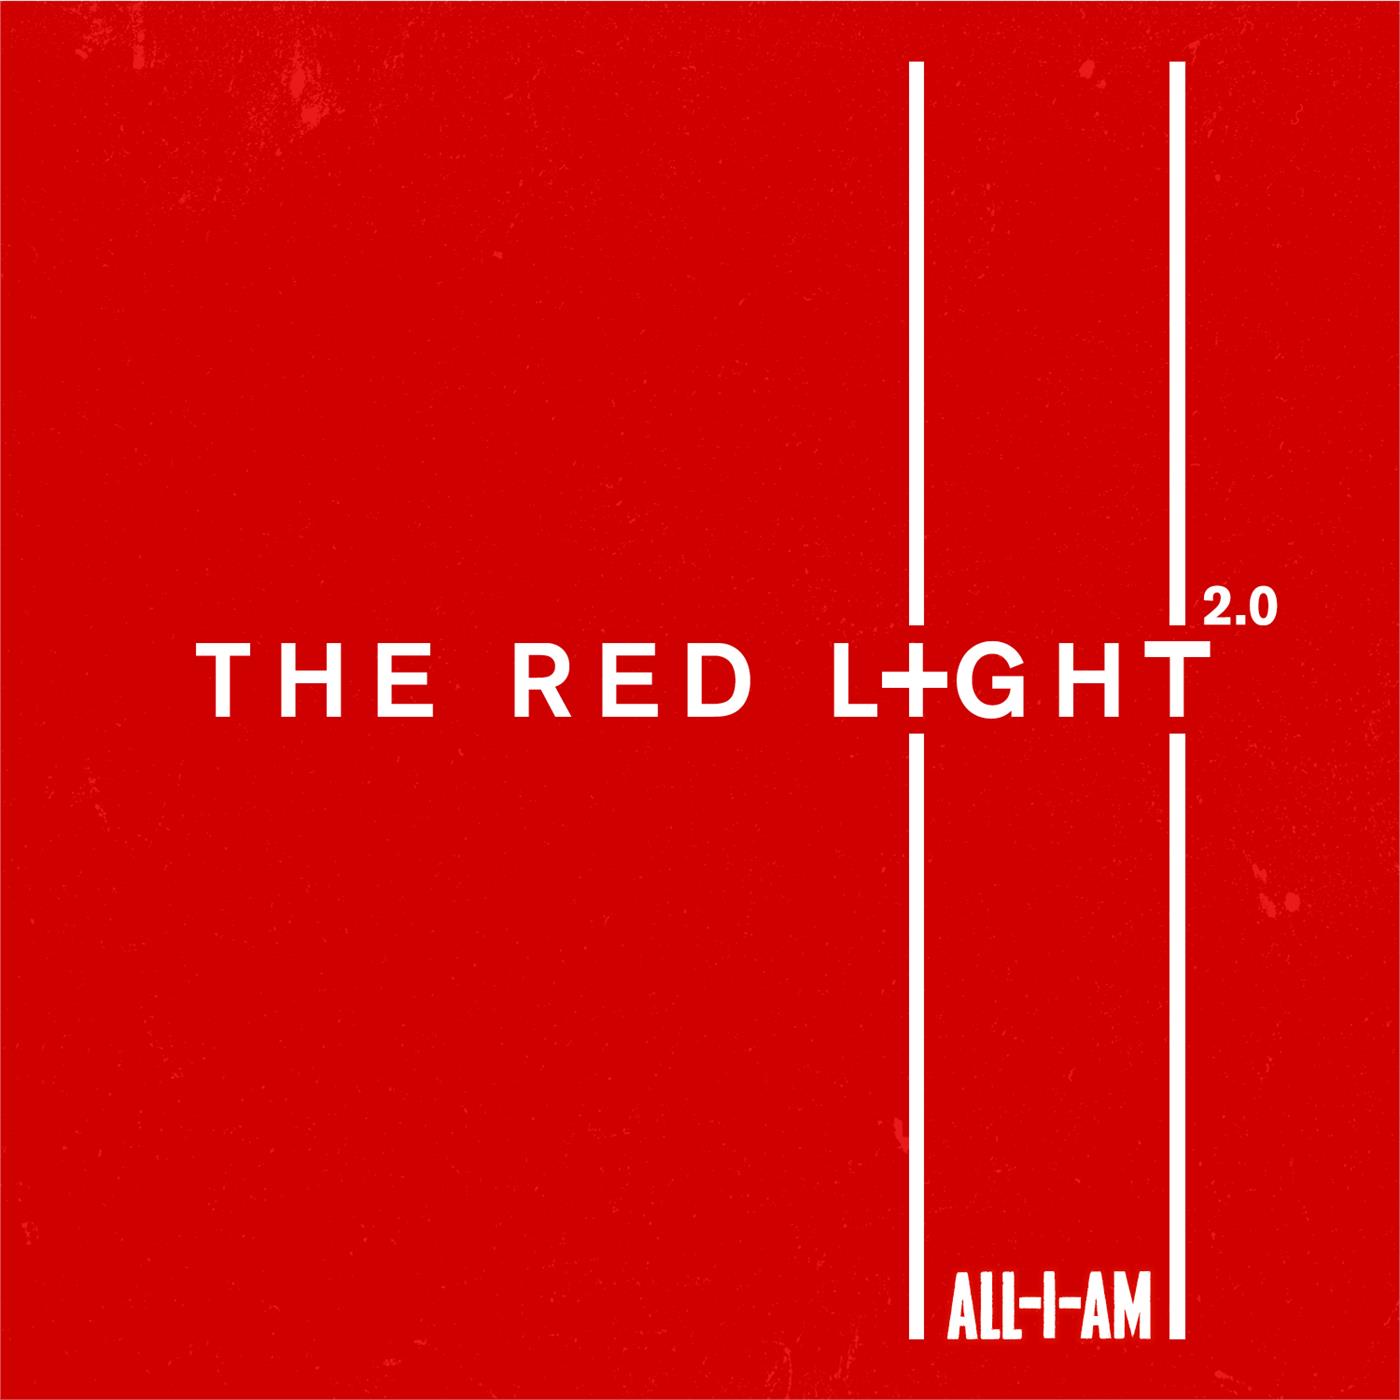 The Red Light 2.0